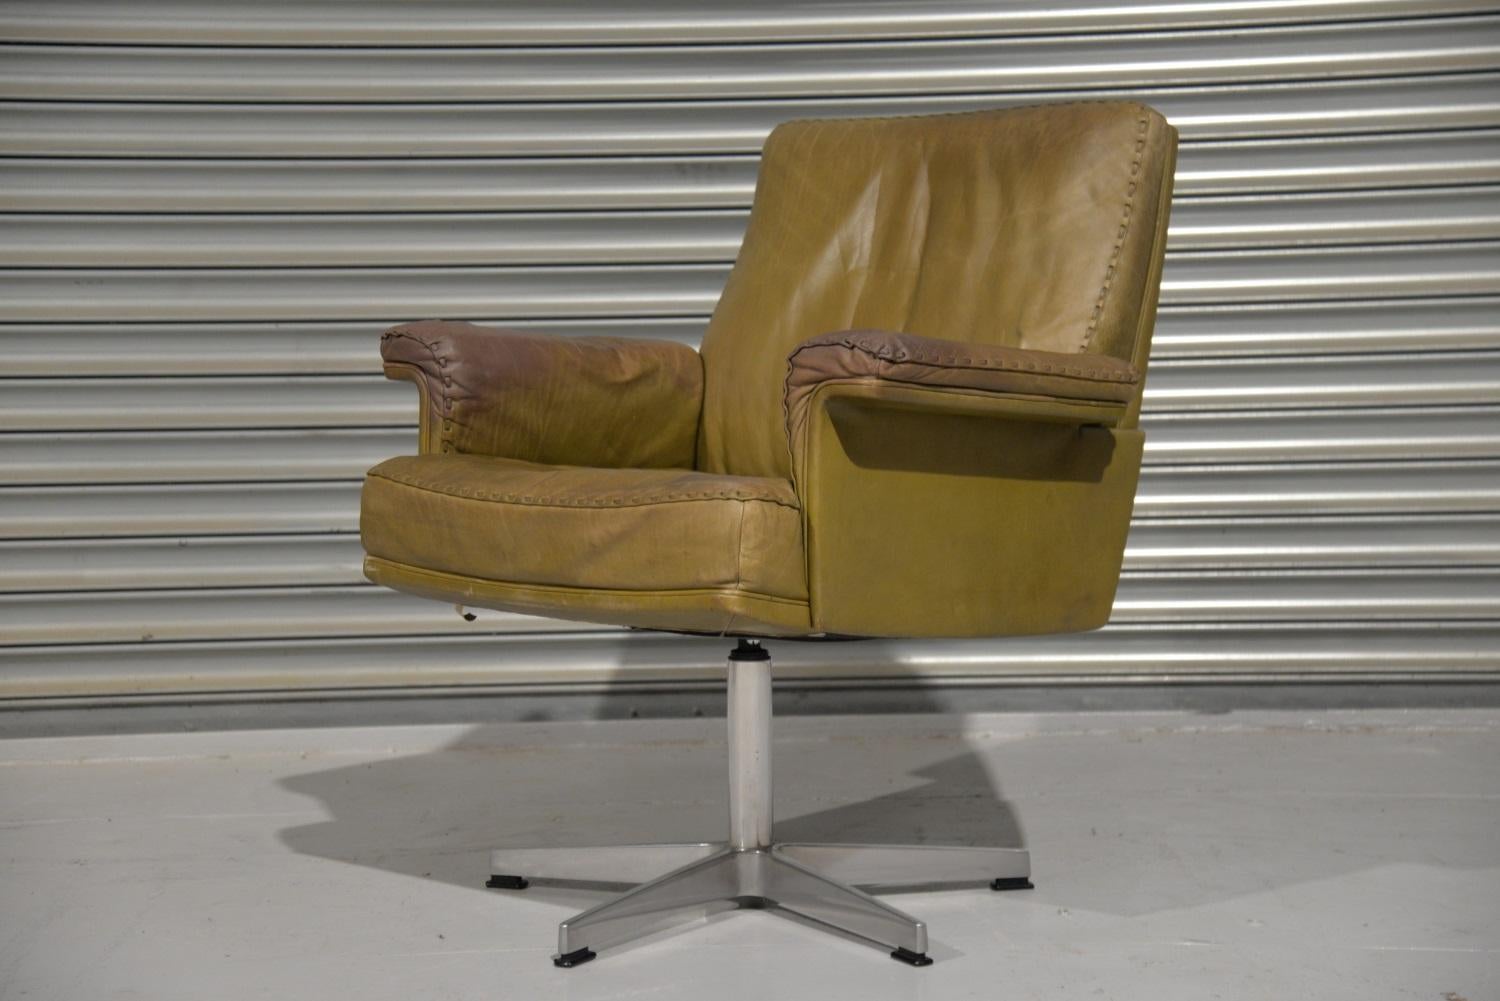 We are delighted to bring to you an extremely rare vintage De Sede DS 35 executive swivel armchair. Hand built in the 1960s to incredibly high standards by De Sede craftsman in Switzerland. The iconic swivel armchair is upholstered in olive green